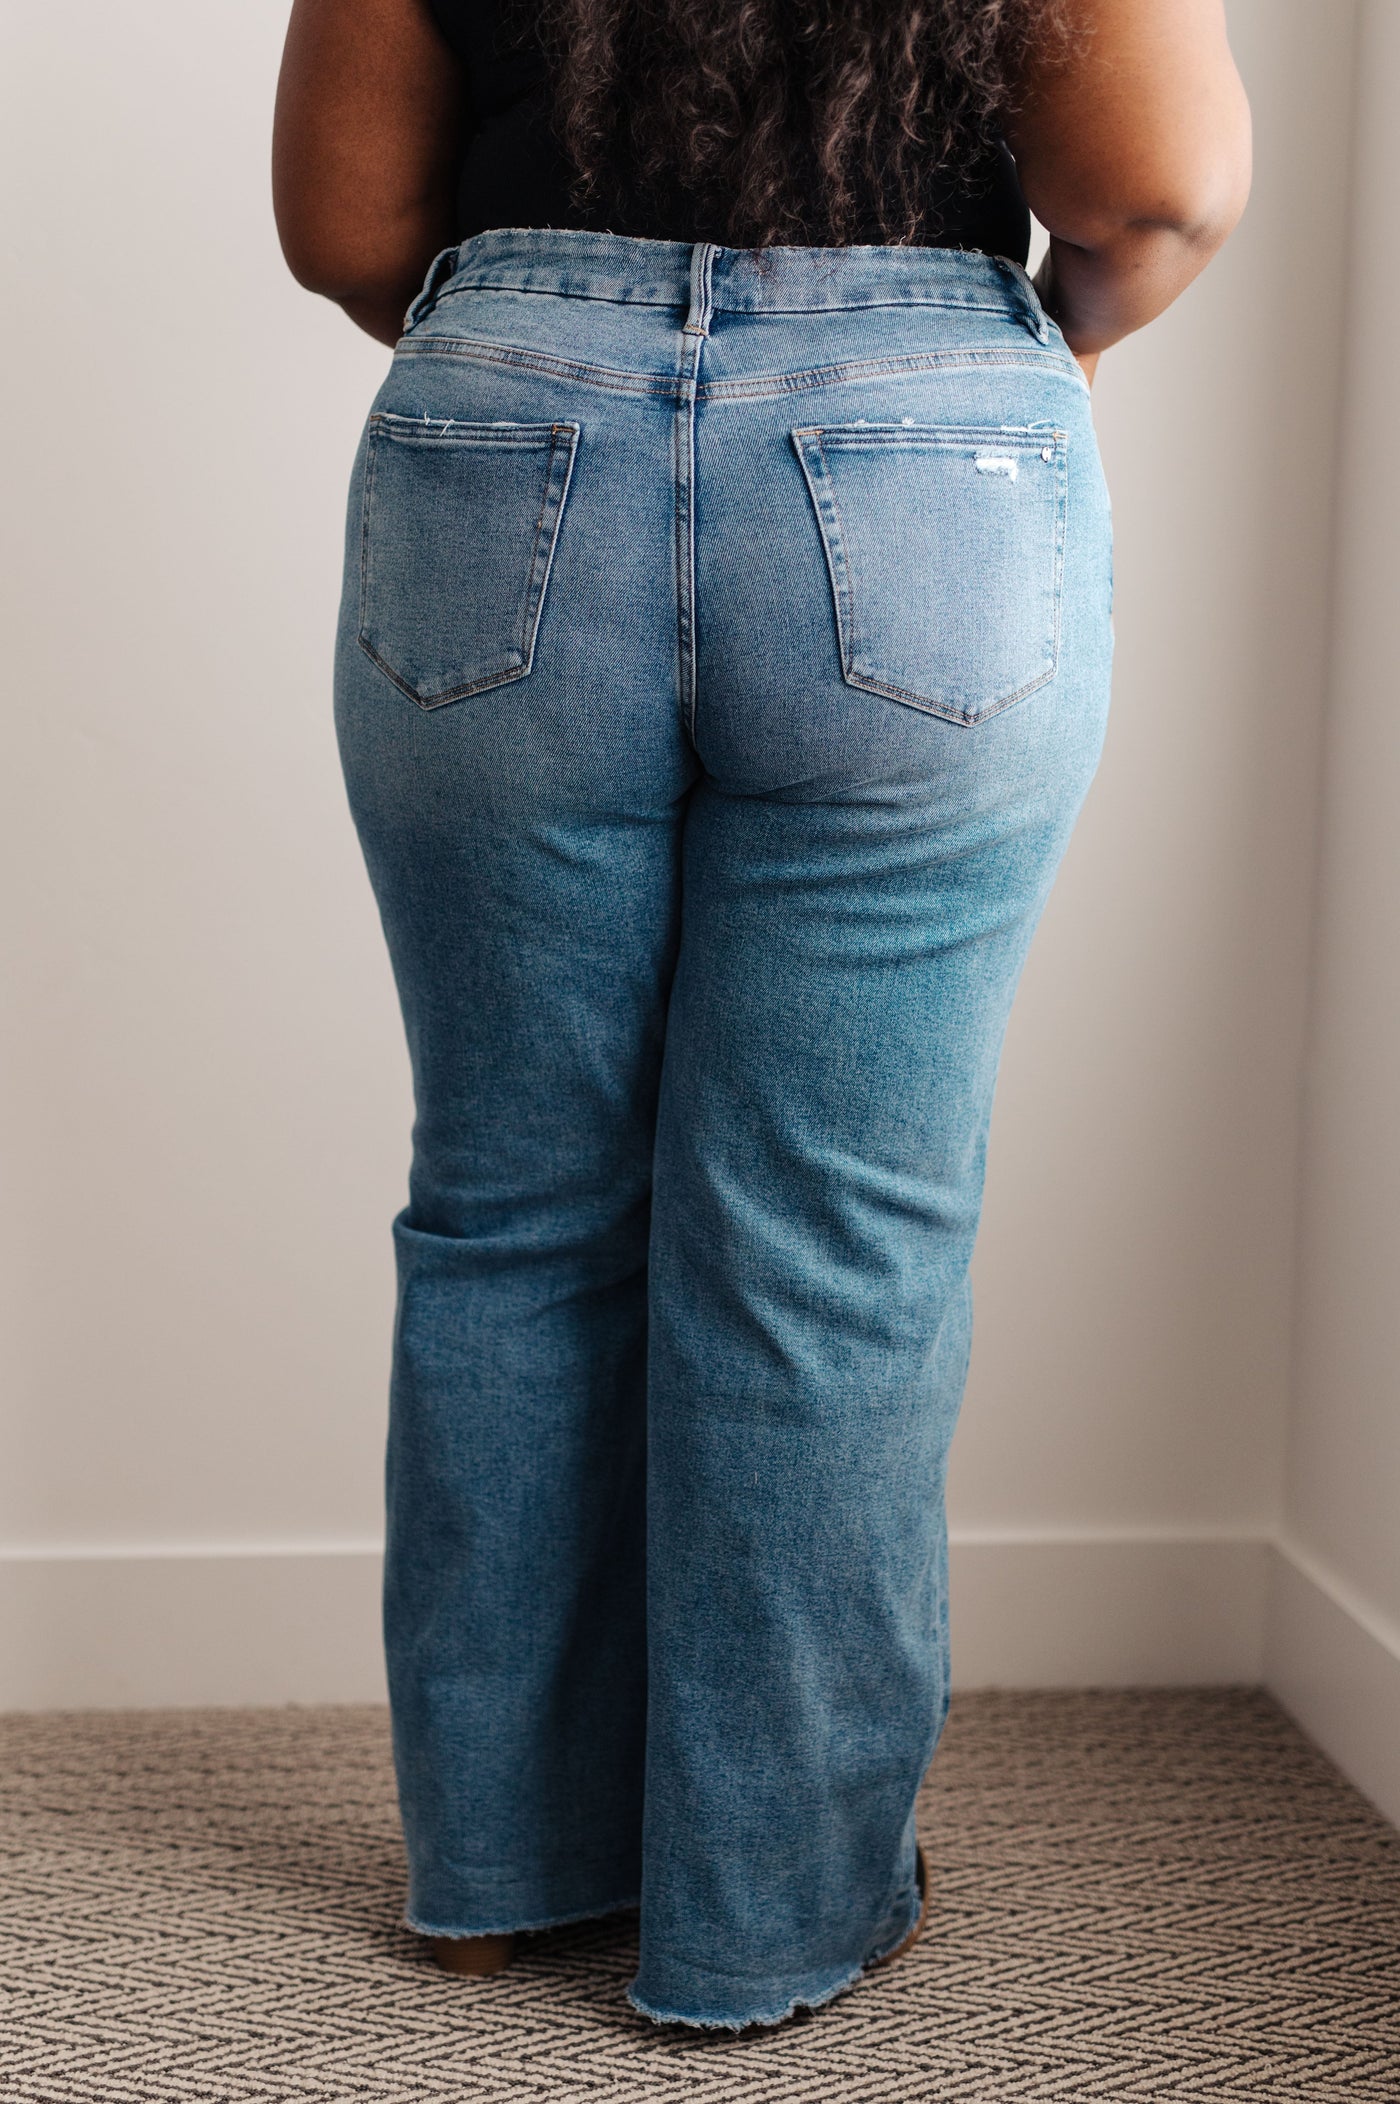 These jeans feature a high rise, zip fly and wide leg for an effortlessly stylish look, and the rigid denim and raw hem provide a timeless feel you will love.